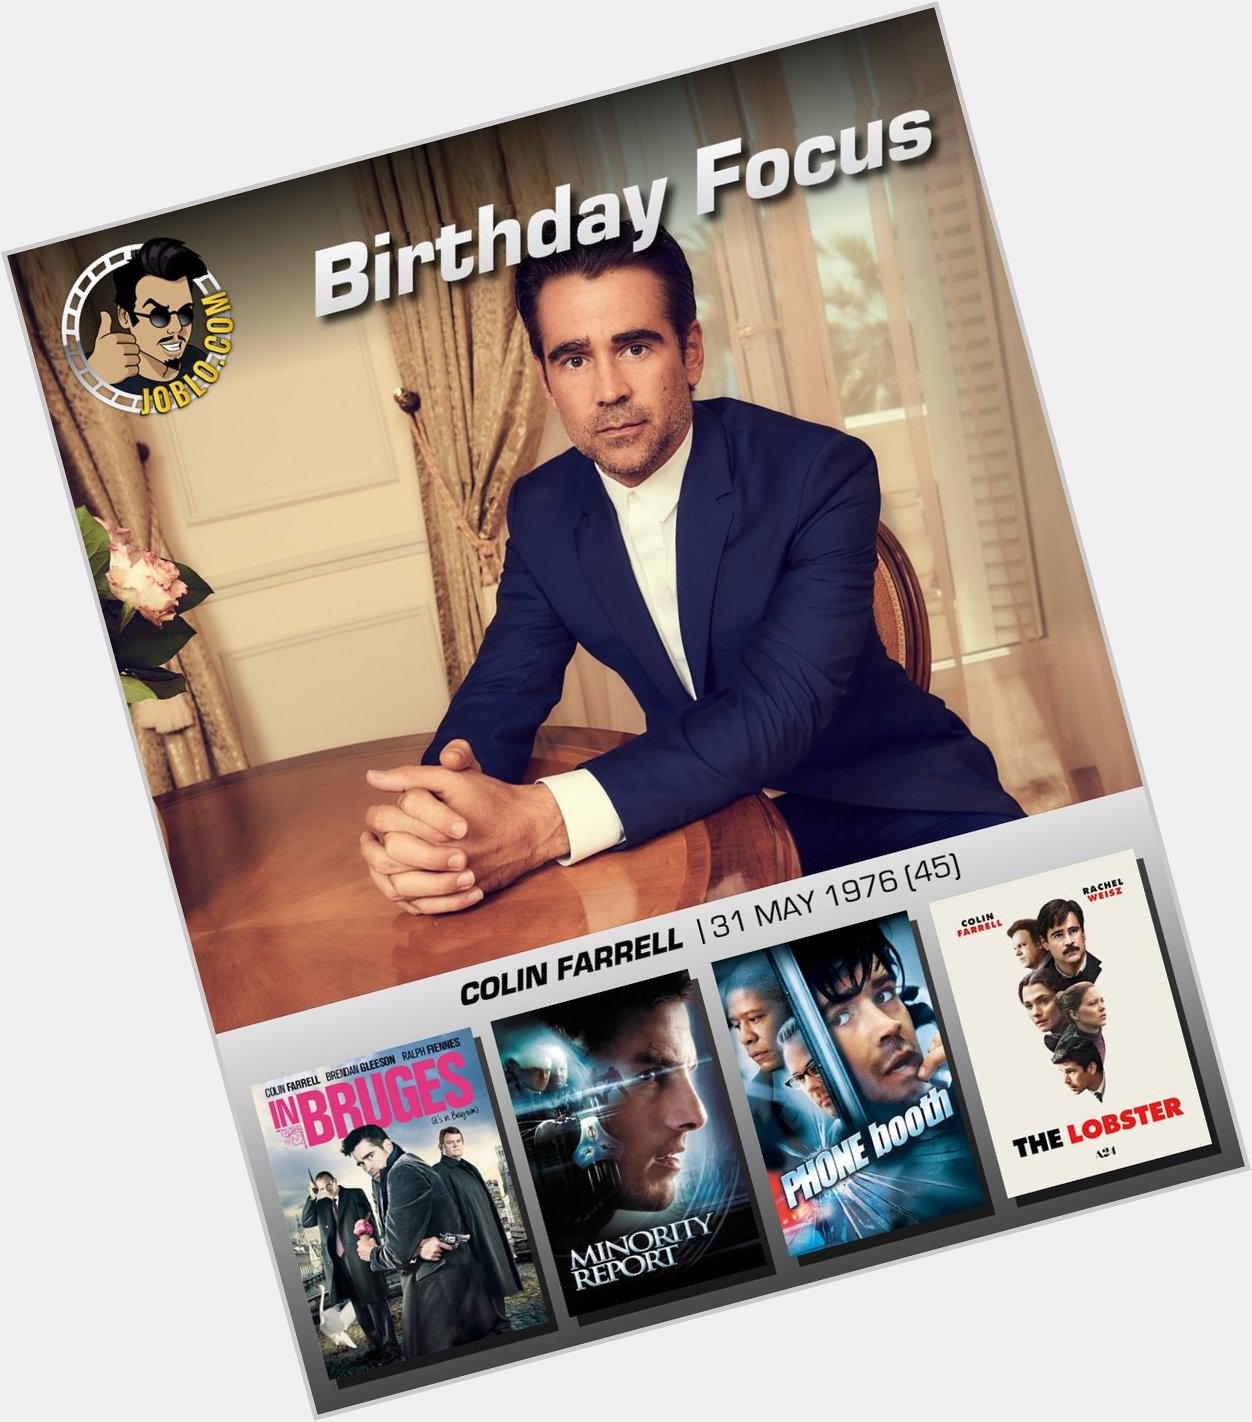 Wishing a very happy 45th birthday to Colin Farrell! 